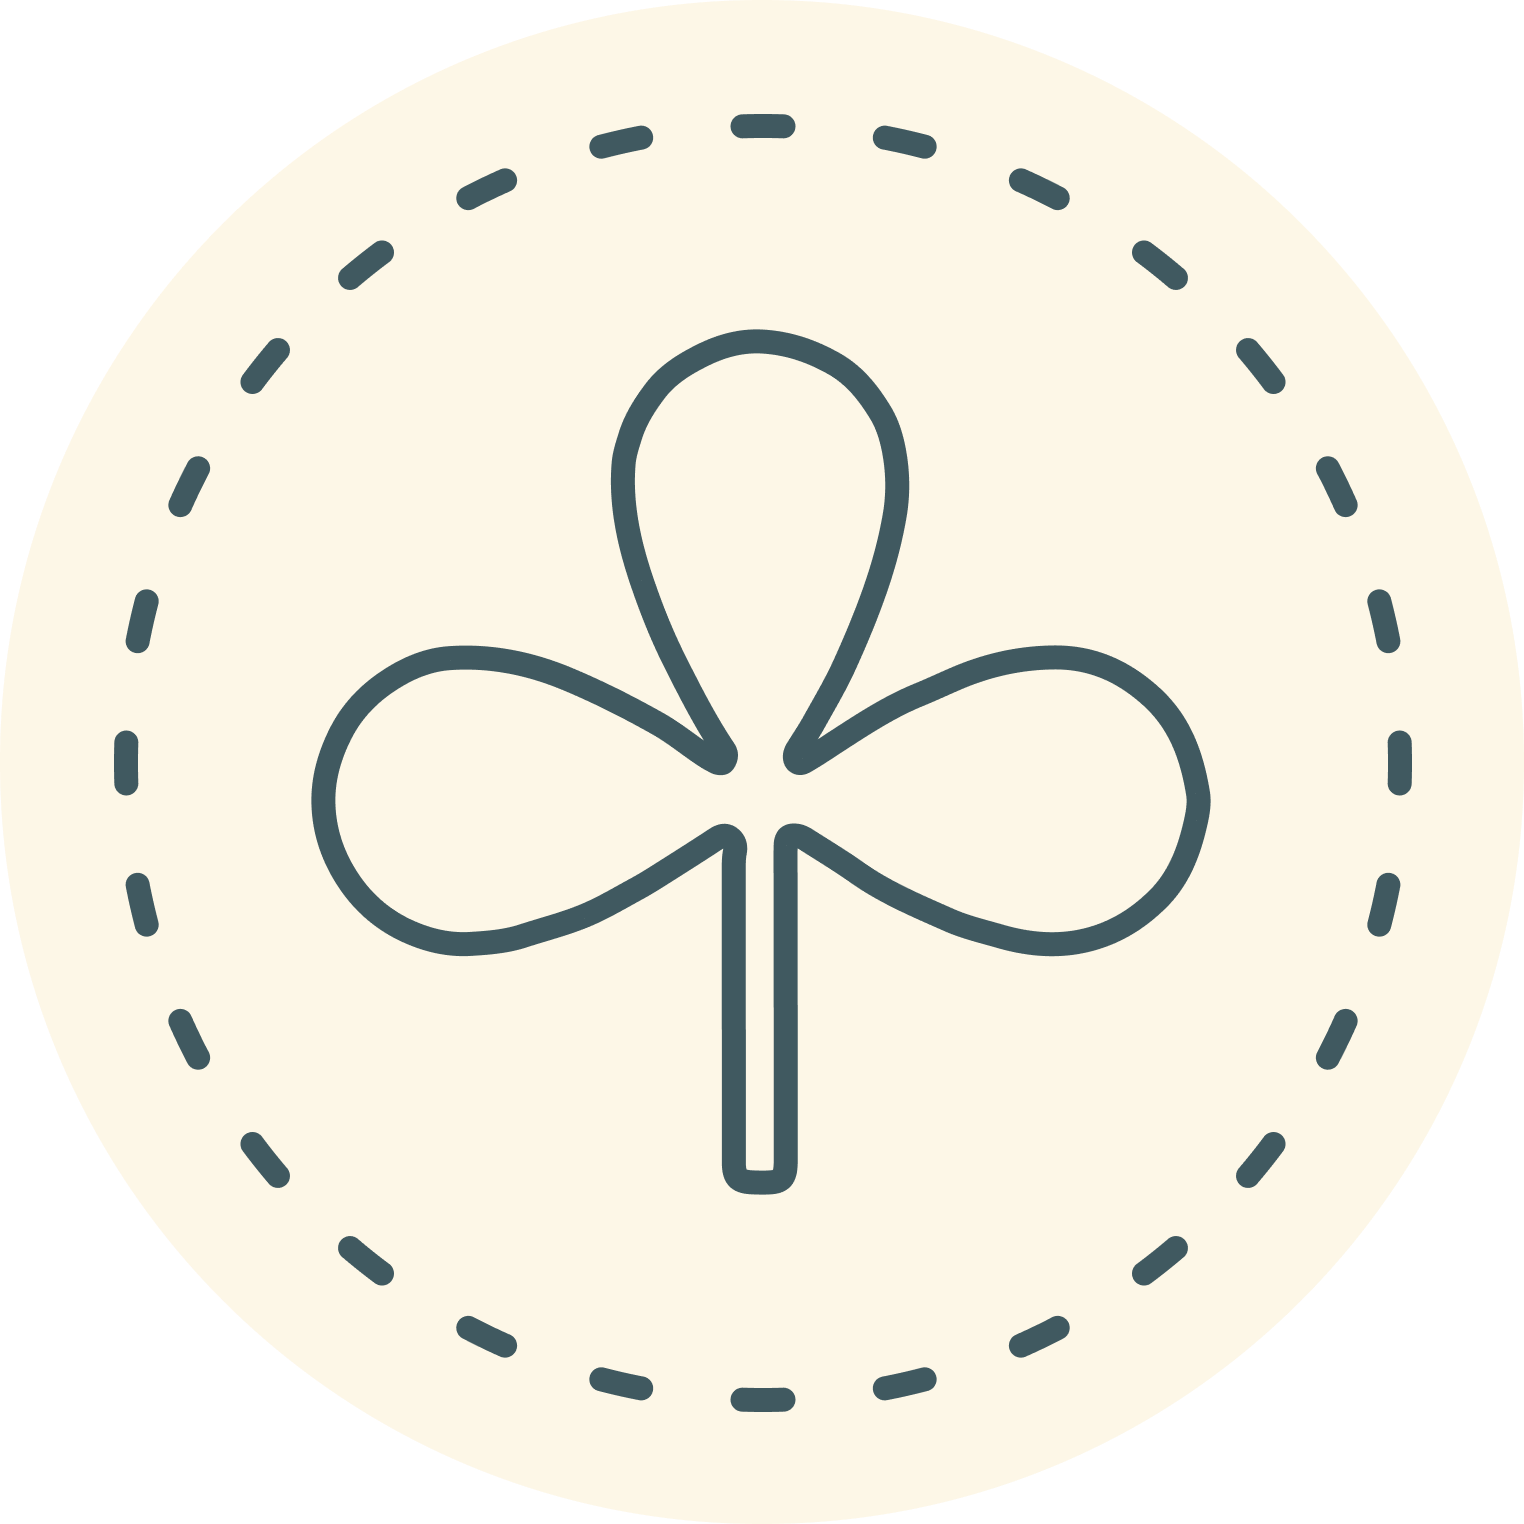 Stylized clover icon with dotted circle on beige background.